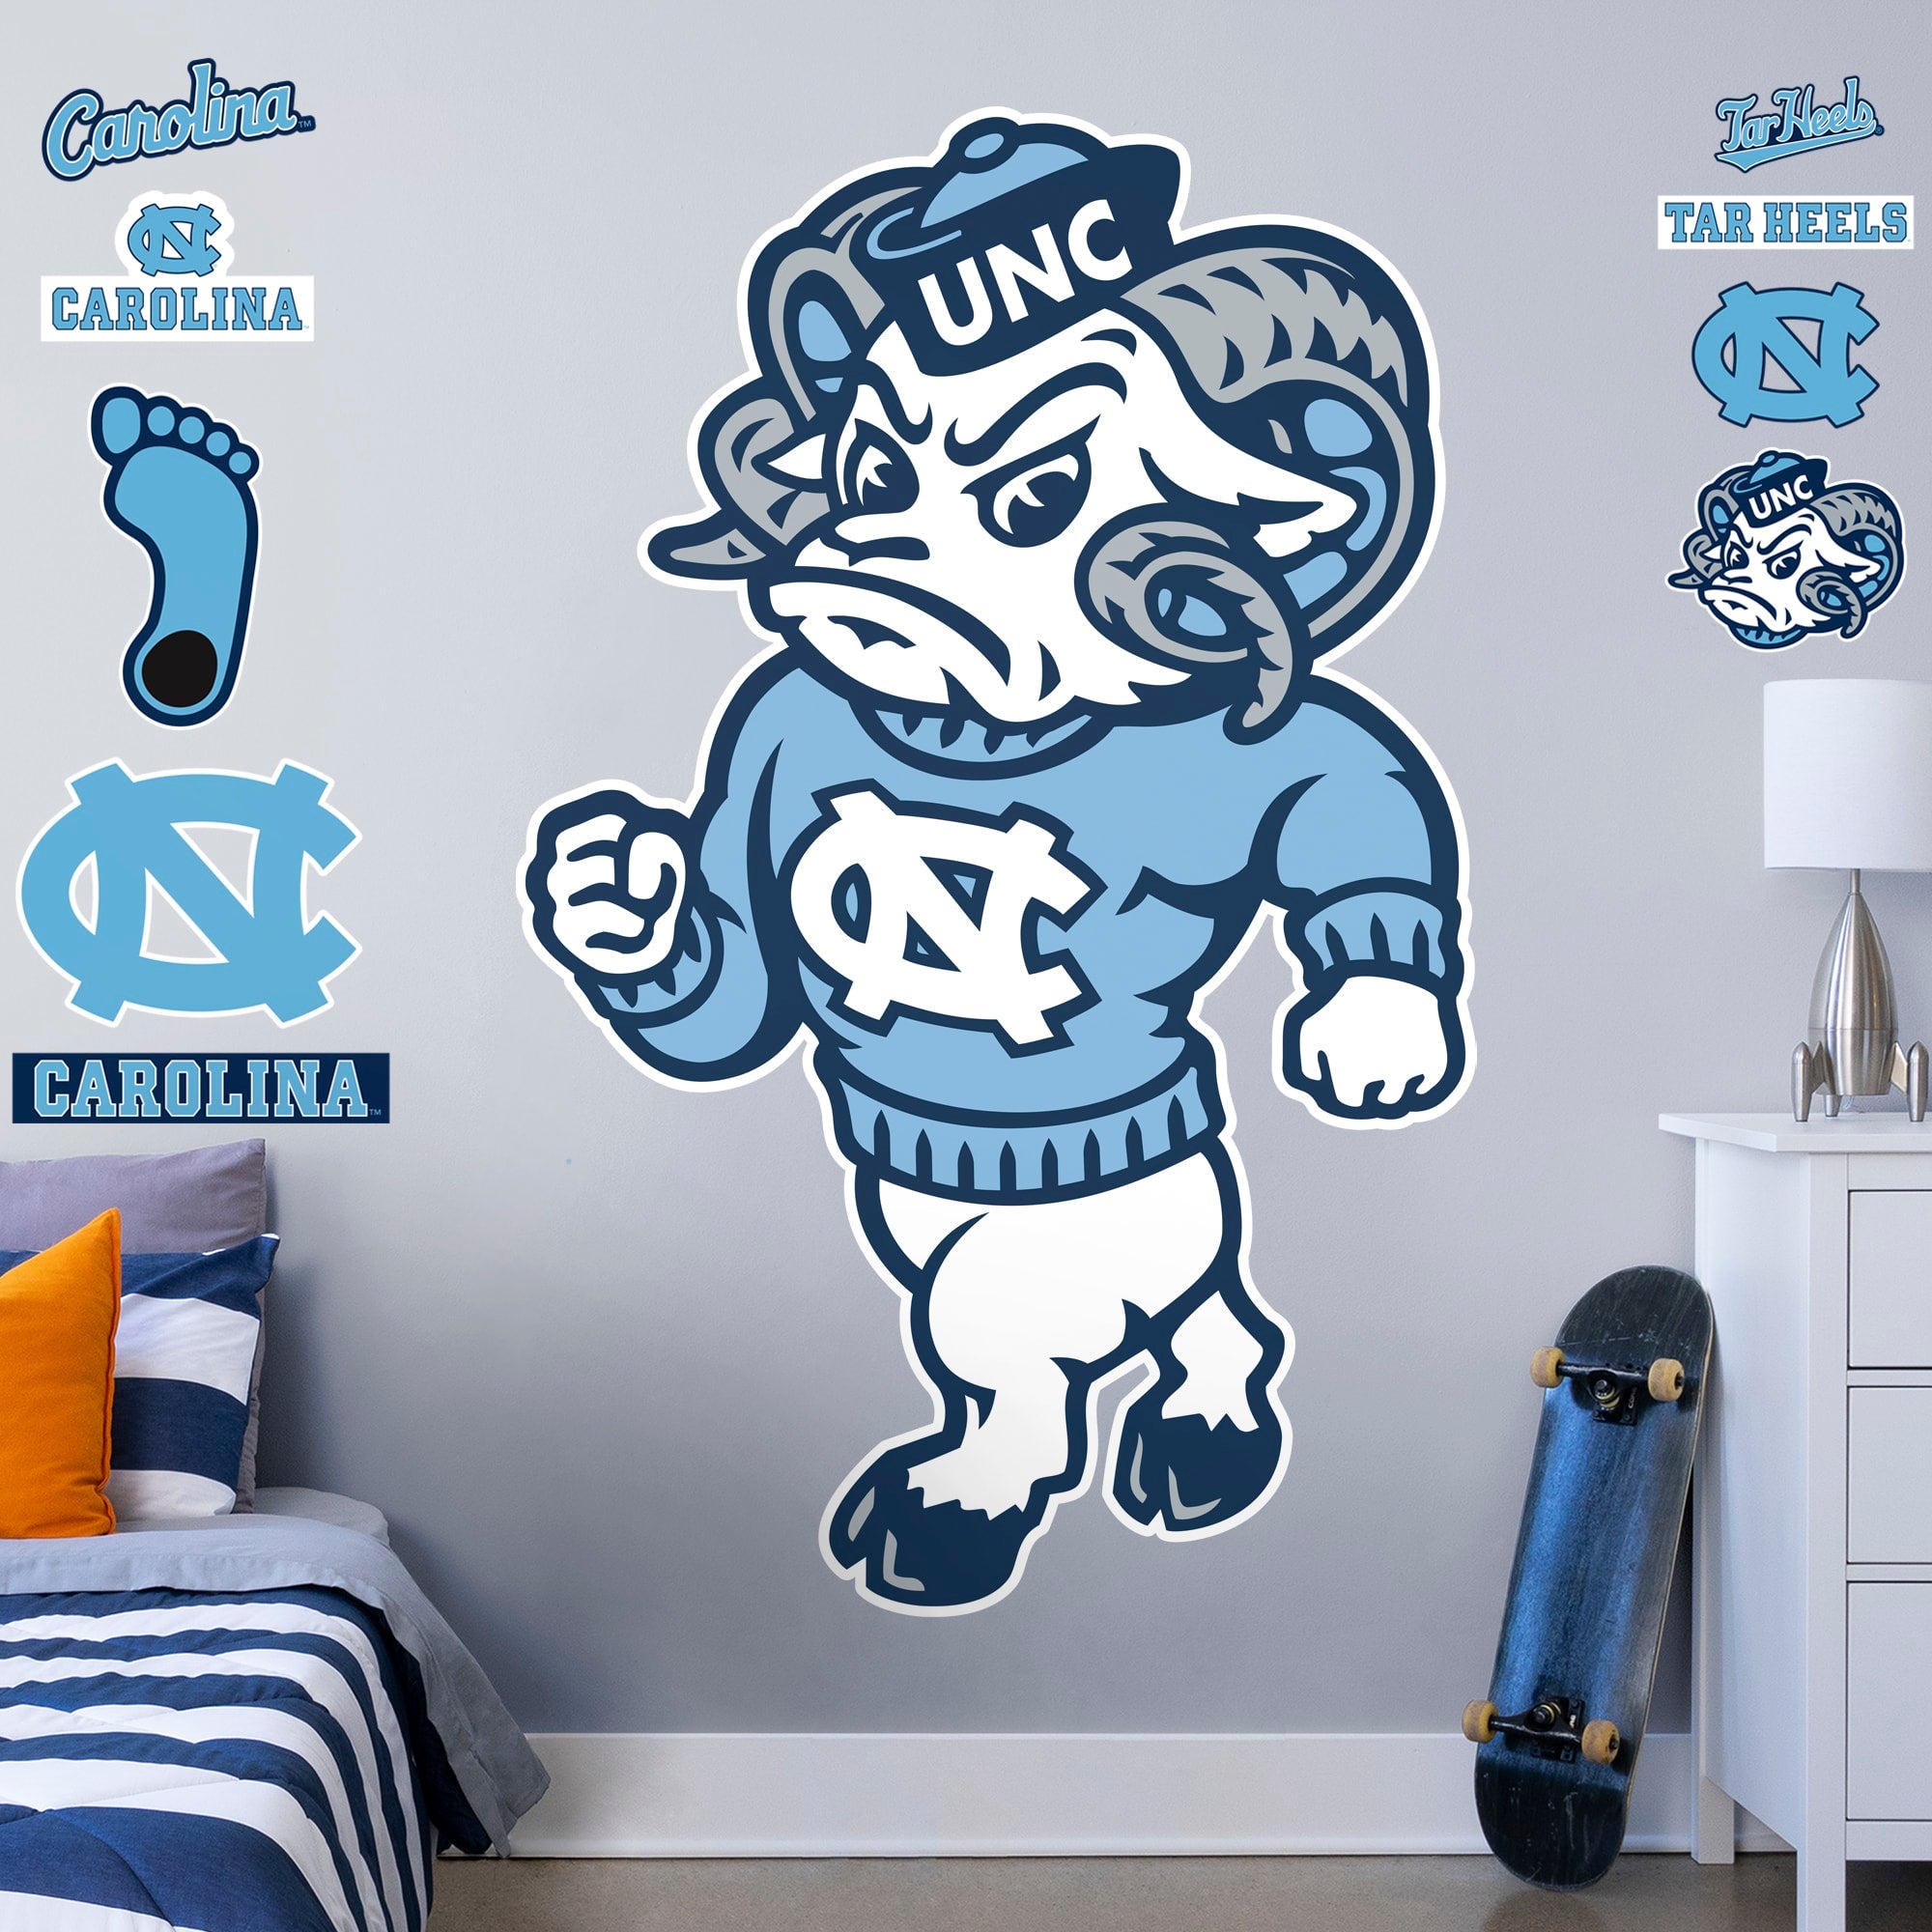 North Carolina Tar Heels: Rameses Mascot - Officially Licensed Removable Wall Decal Life-Size Mascot + 11 Decals (45"W x 71"H) b